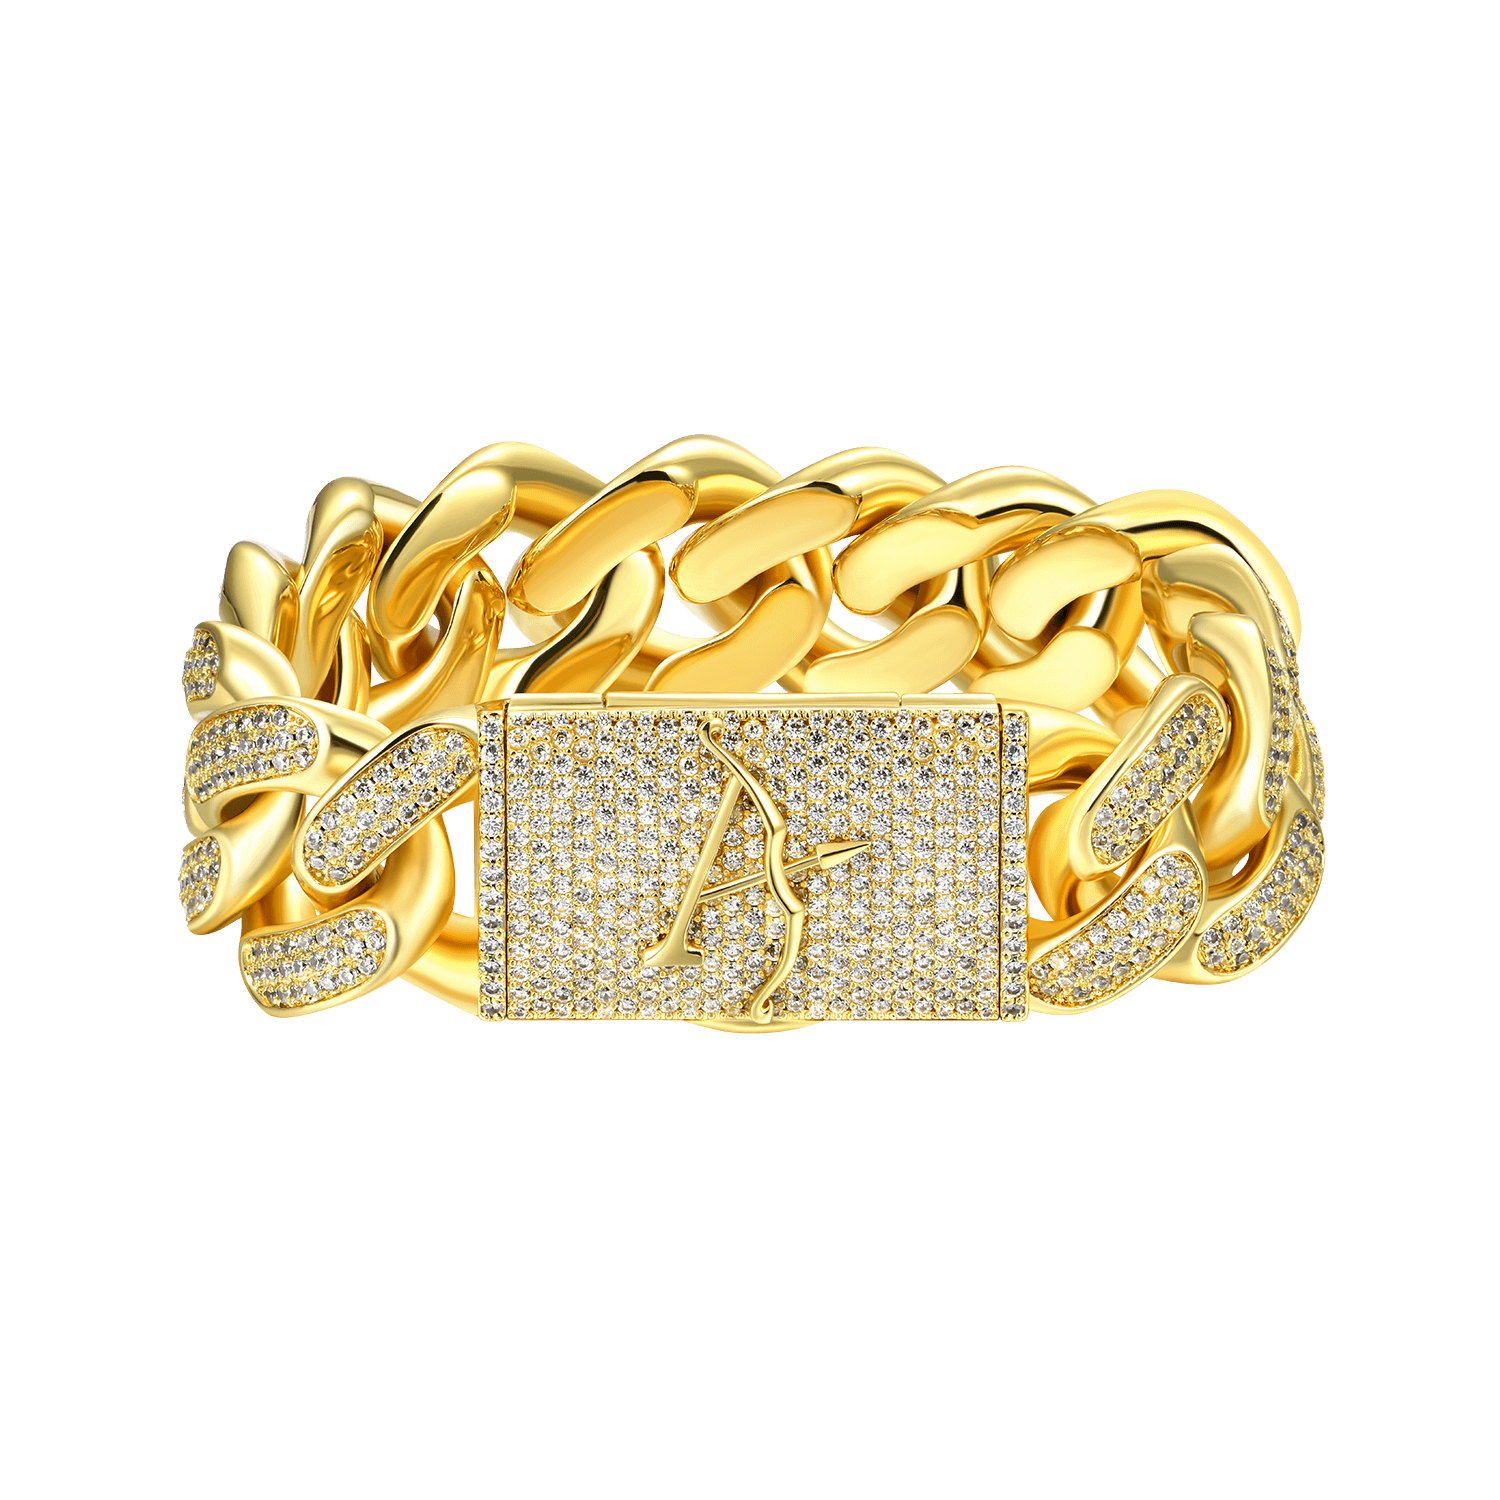 19mm New 14K Gold Iced Out Cuban Bracelet - Dope Jewelry - APORRO